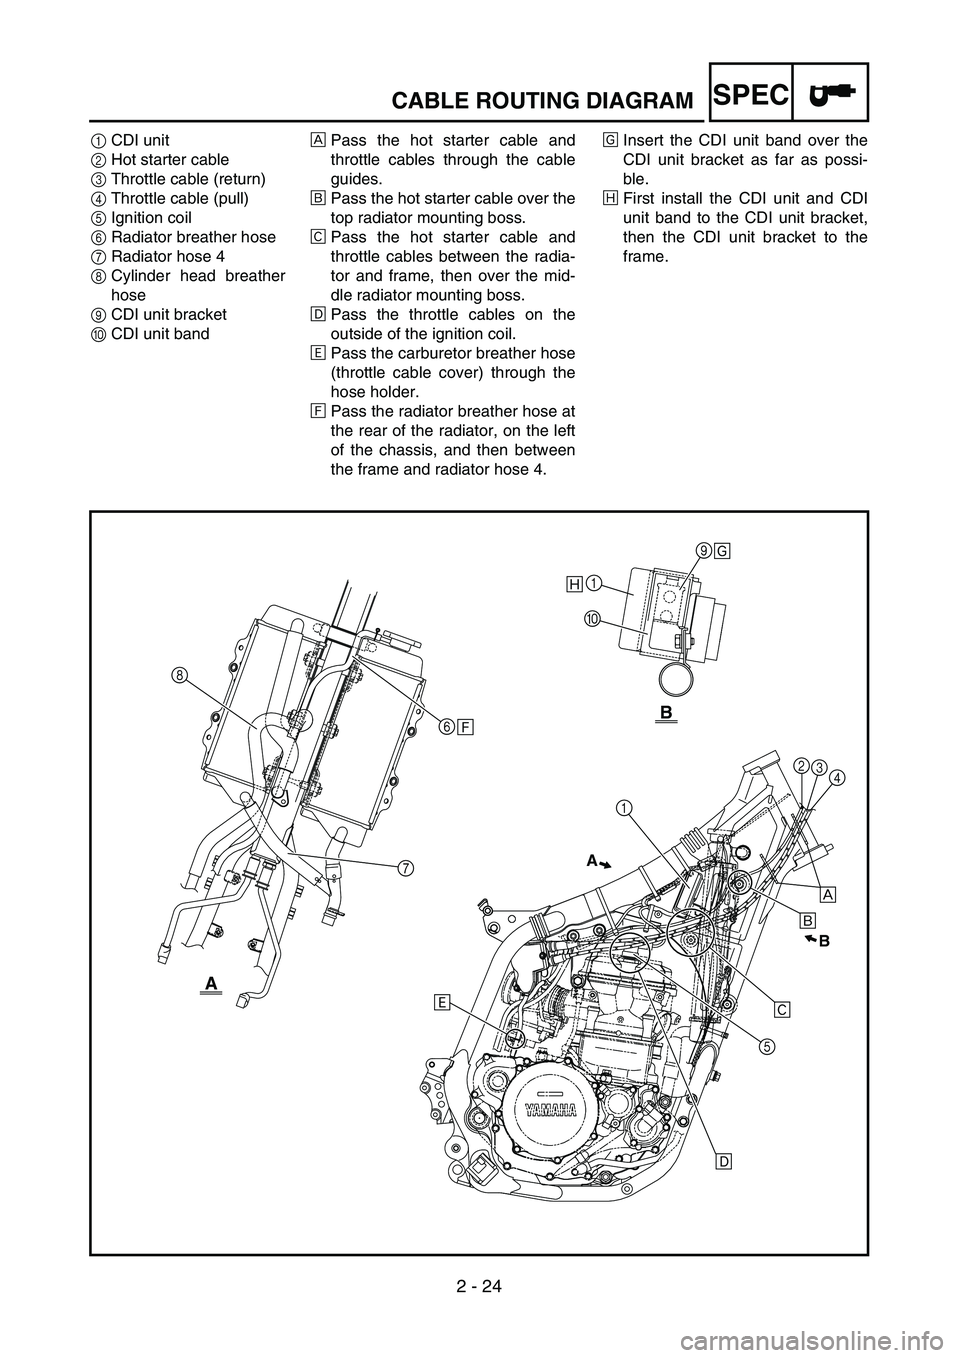 YAMAHA YZ450F 2004  Owners Manual 2 - 24
SPECCABLE ROUTING DIAGRAM
1CDI unit
2Hot starter cable
3Throttle cable (return)
4Throttle cable (pull)
5Ignition coil
6Radiator breather hose
7Radiator hose 4
8Cylinder head breather
hose
9CDI 